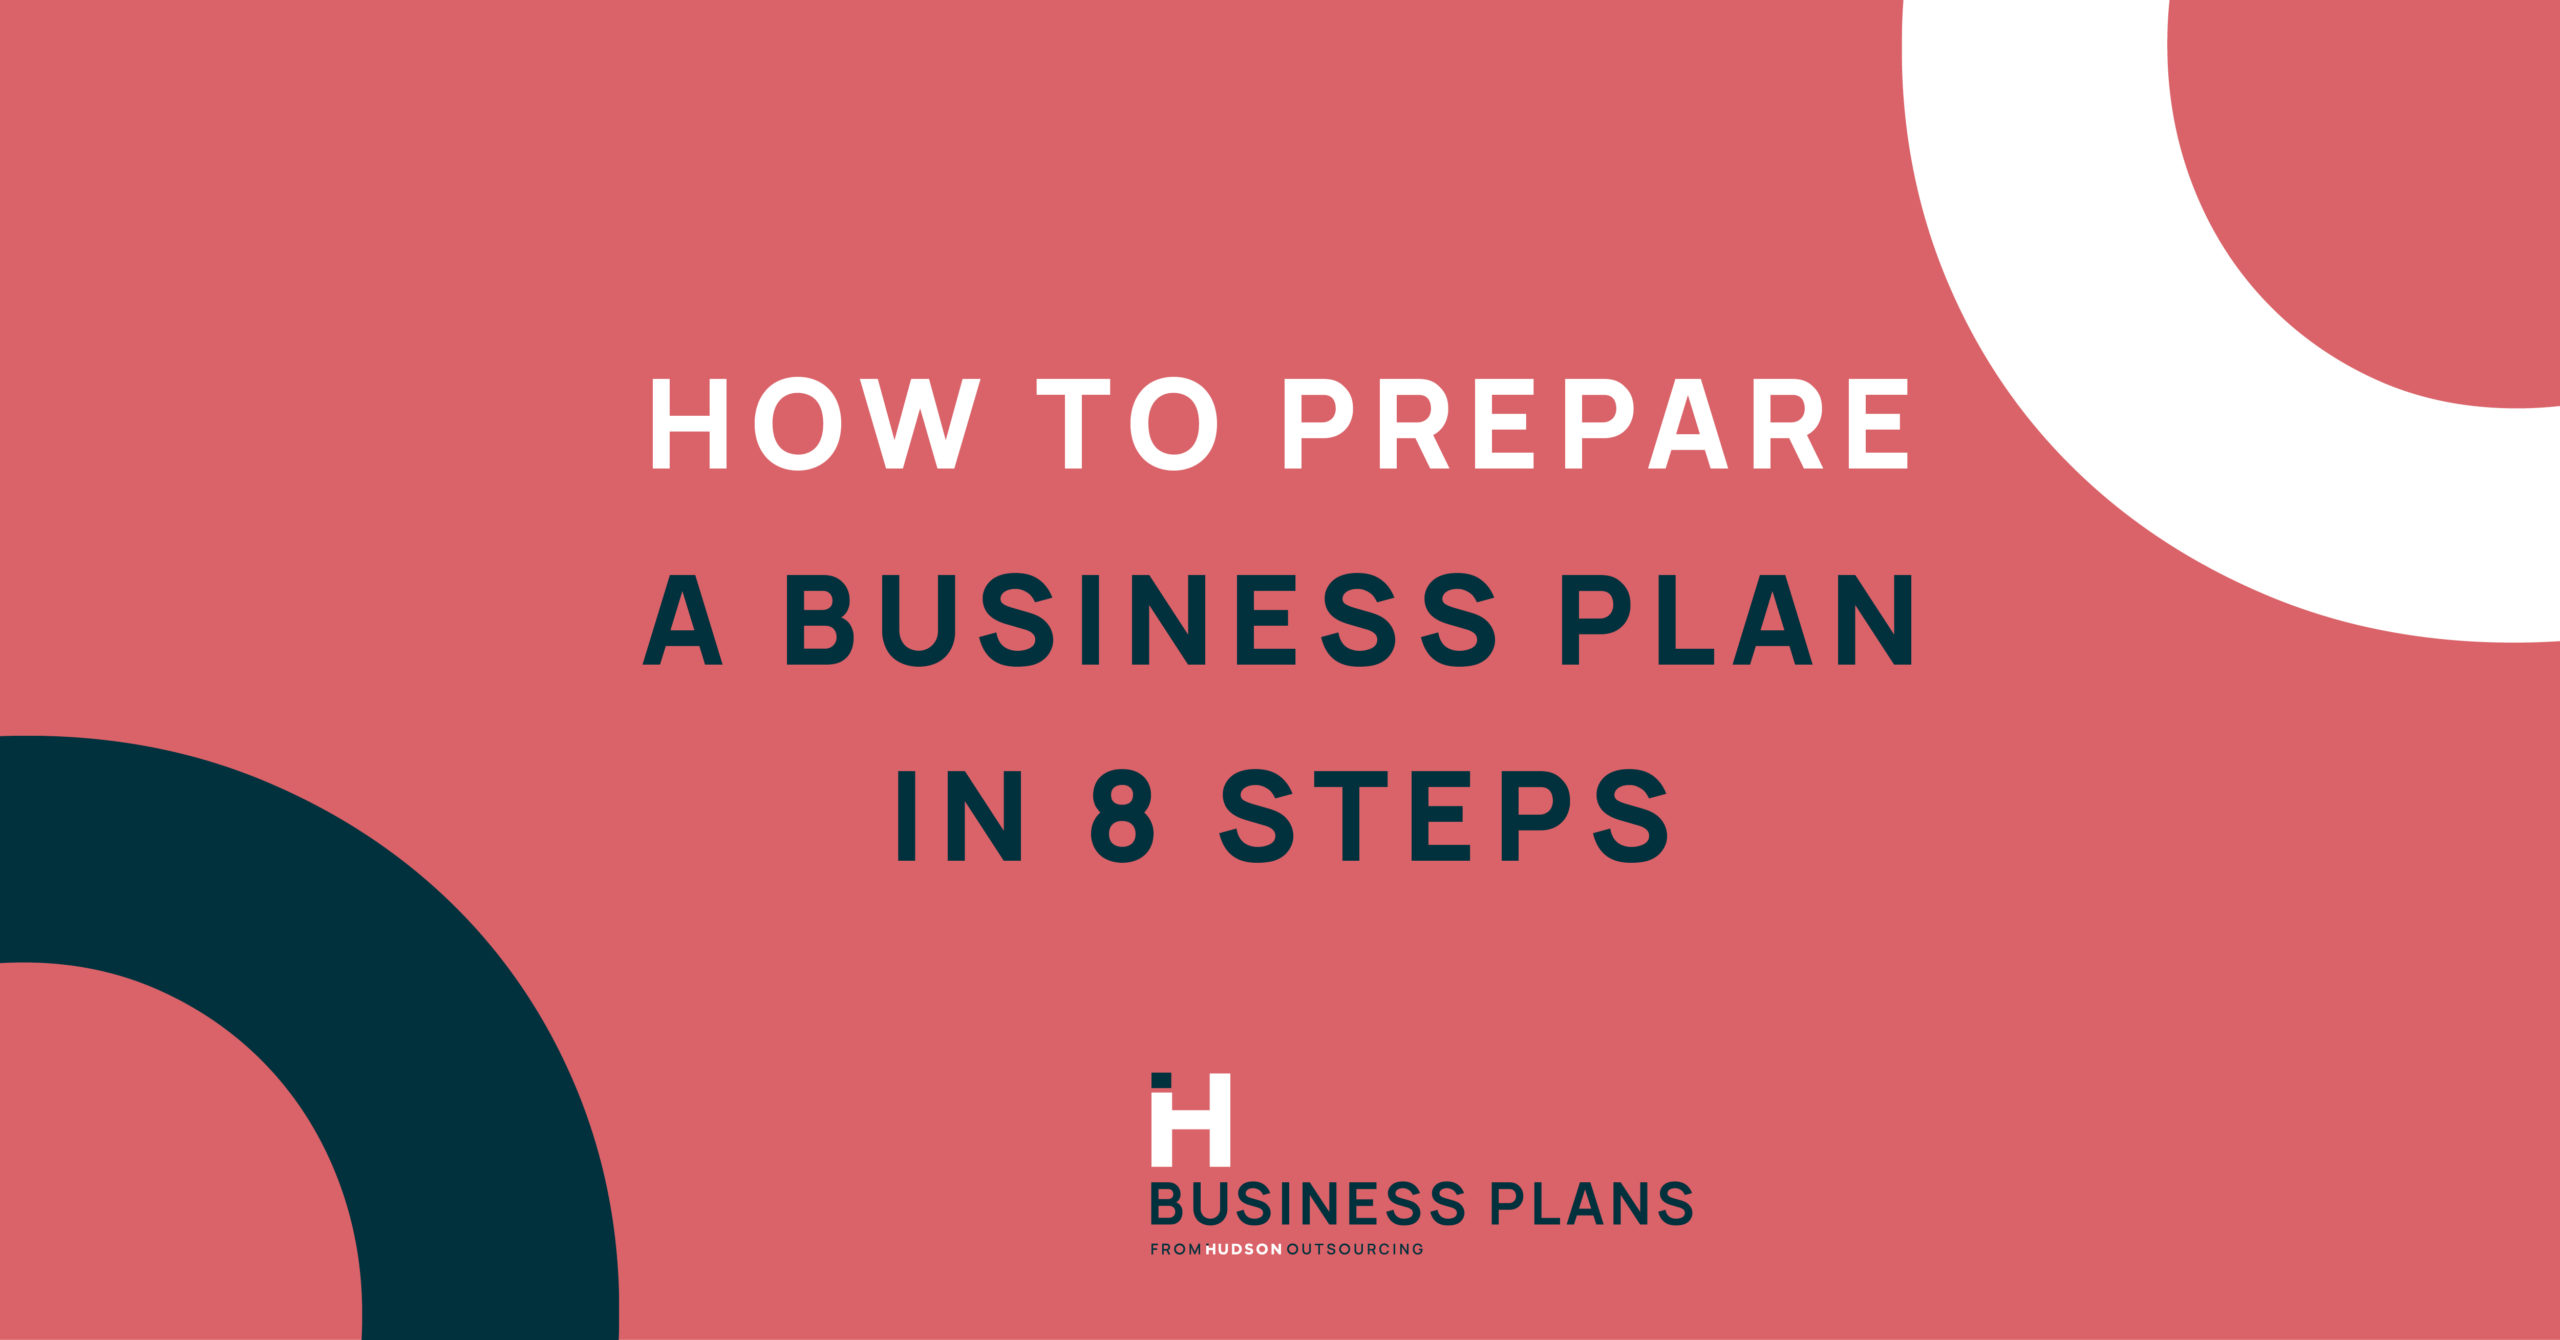 How to Prepare a Business Plan in 8 Steps